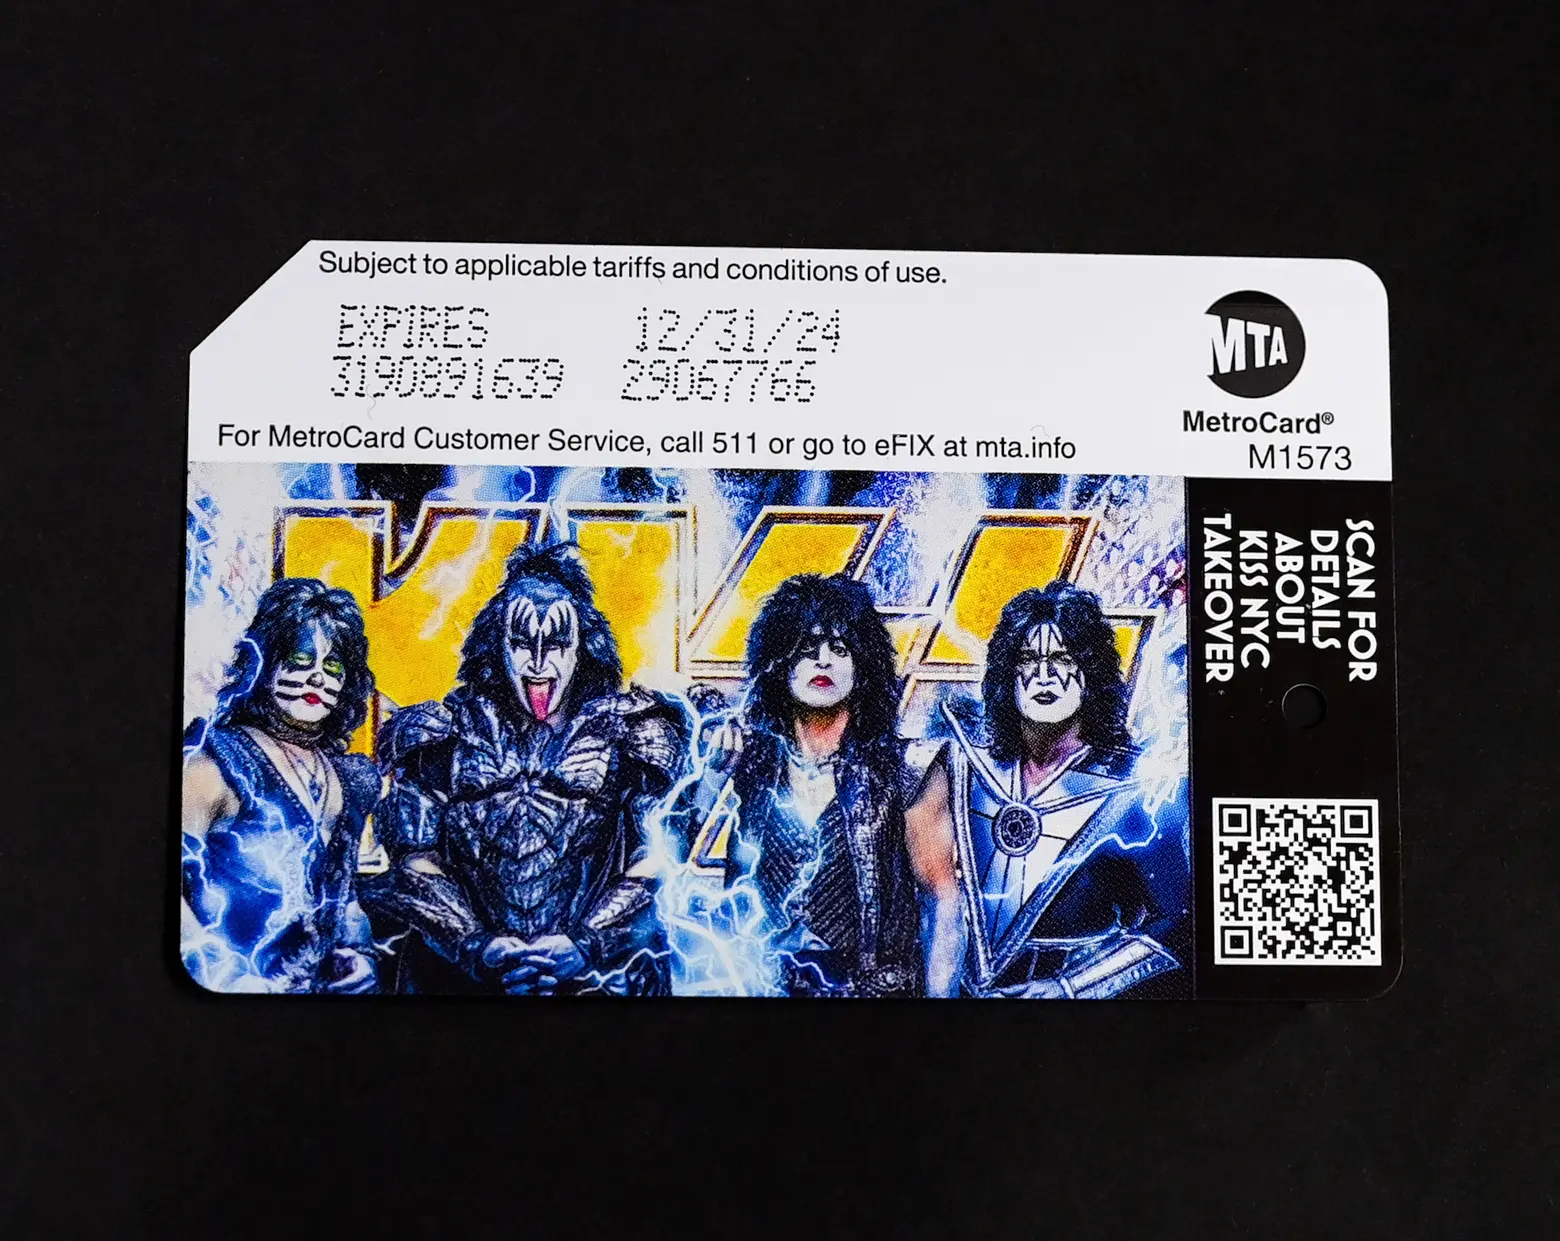 KISS announces NYC takeover, including limited-edition MetroCards